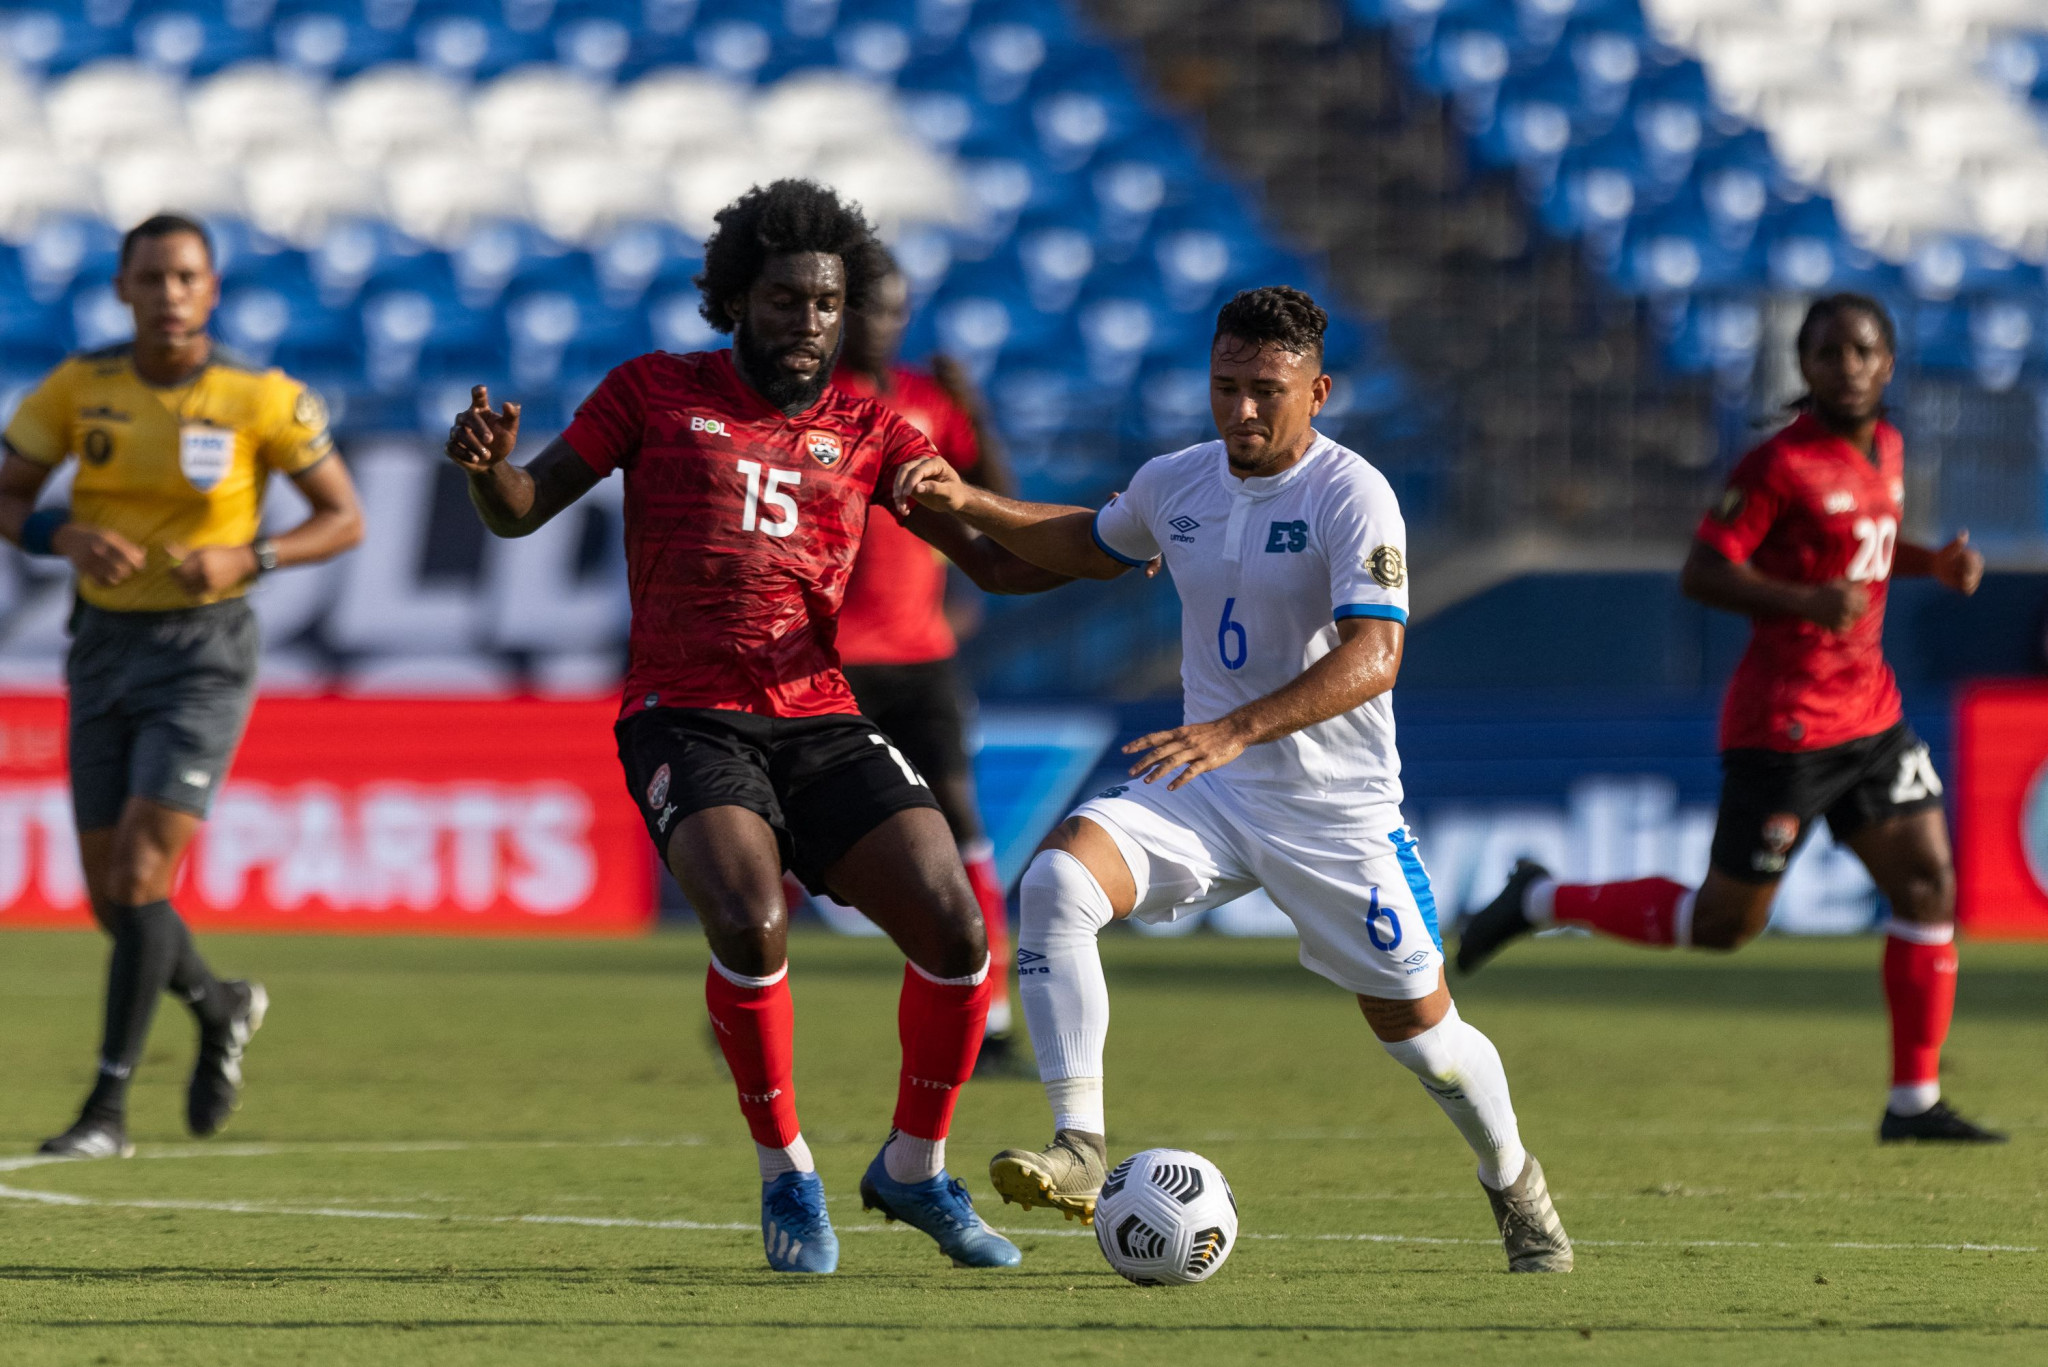 El Salvador earned a second win of the Gold Cup tournament against Trinidad and Tobago  in Frisco ©Getty Images